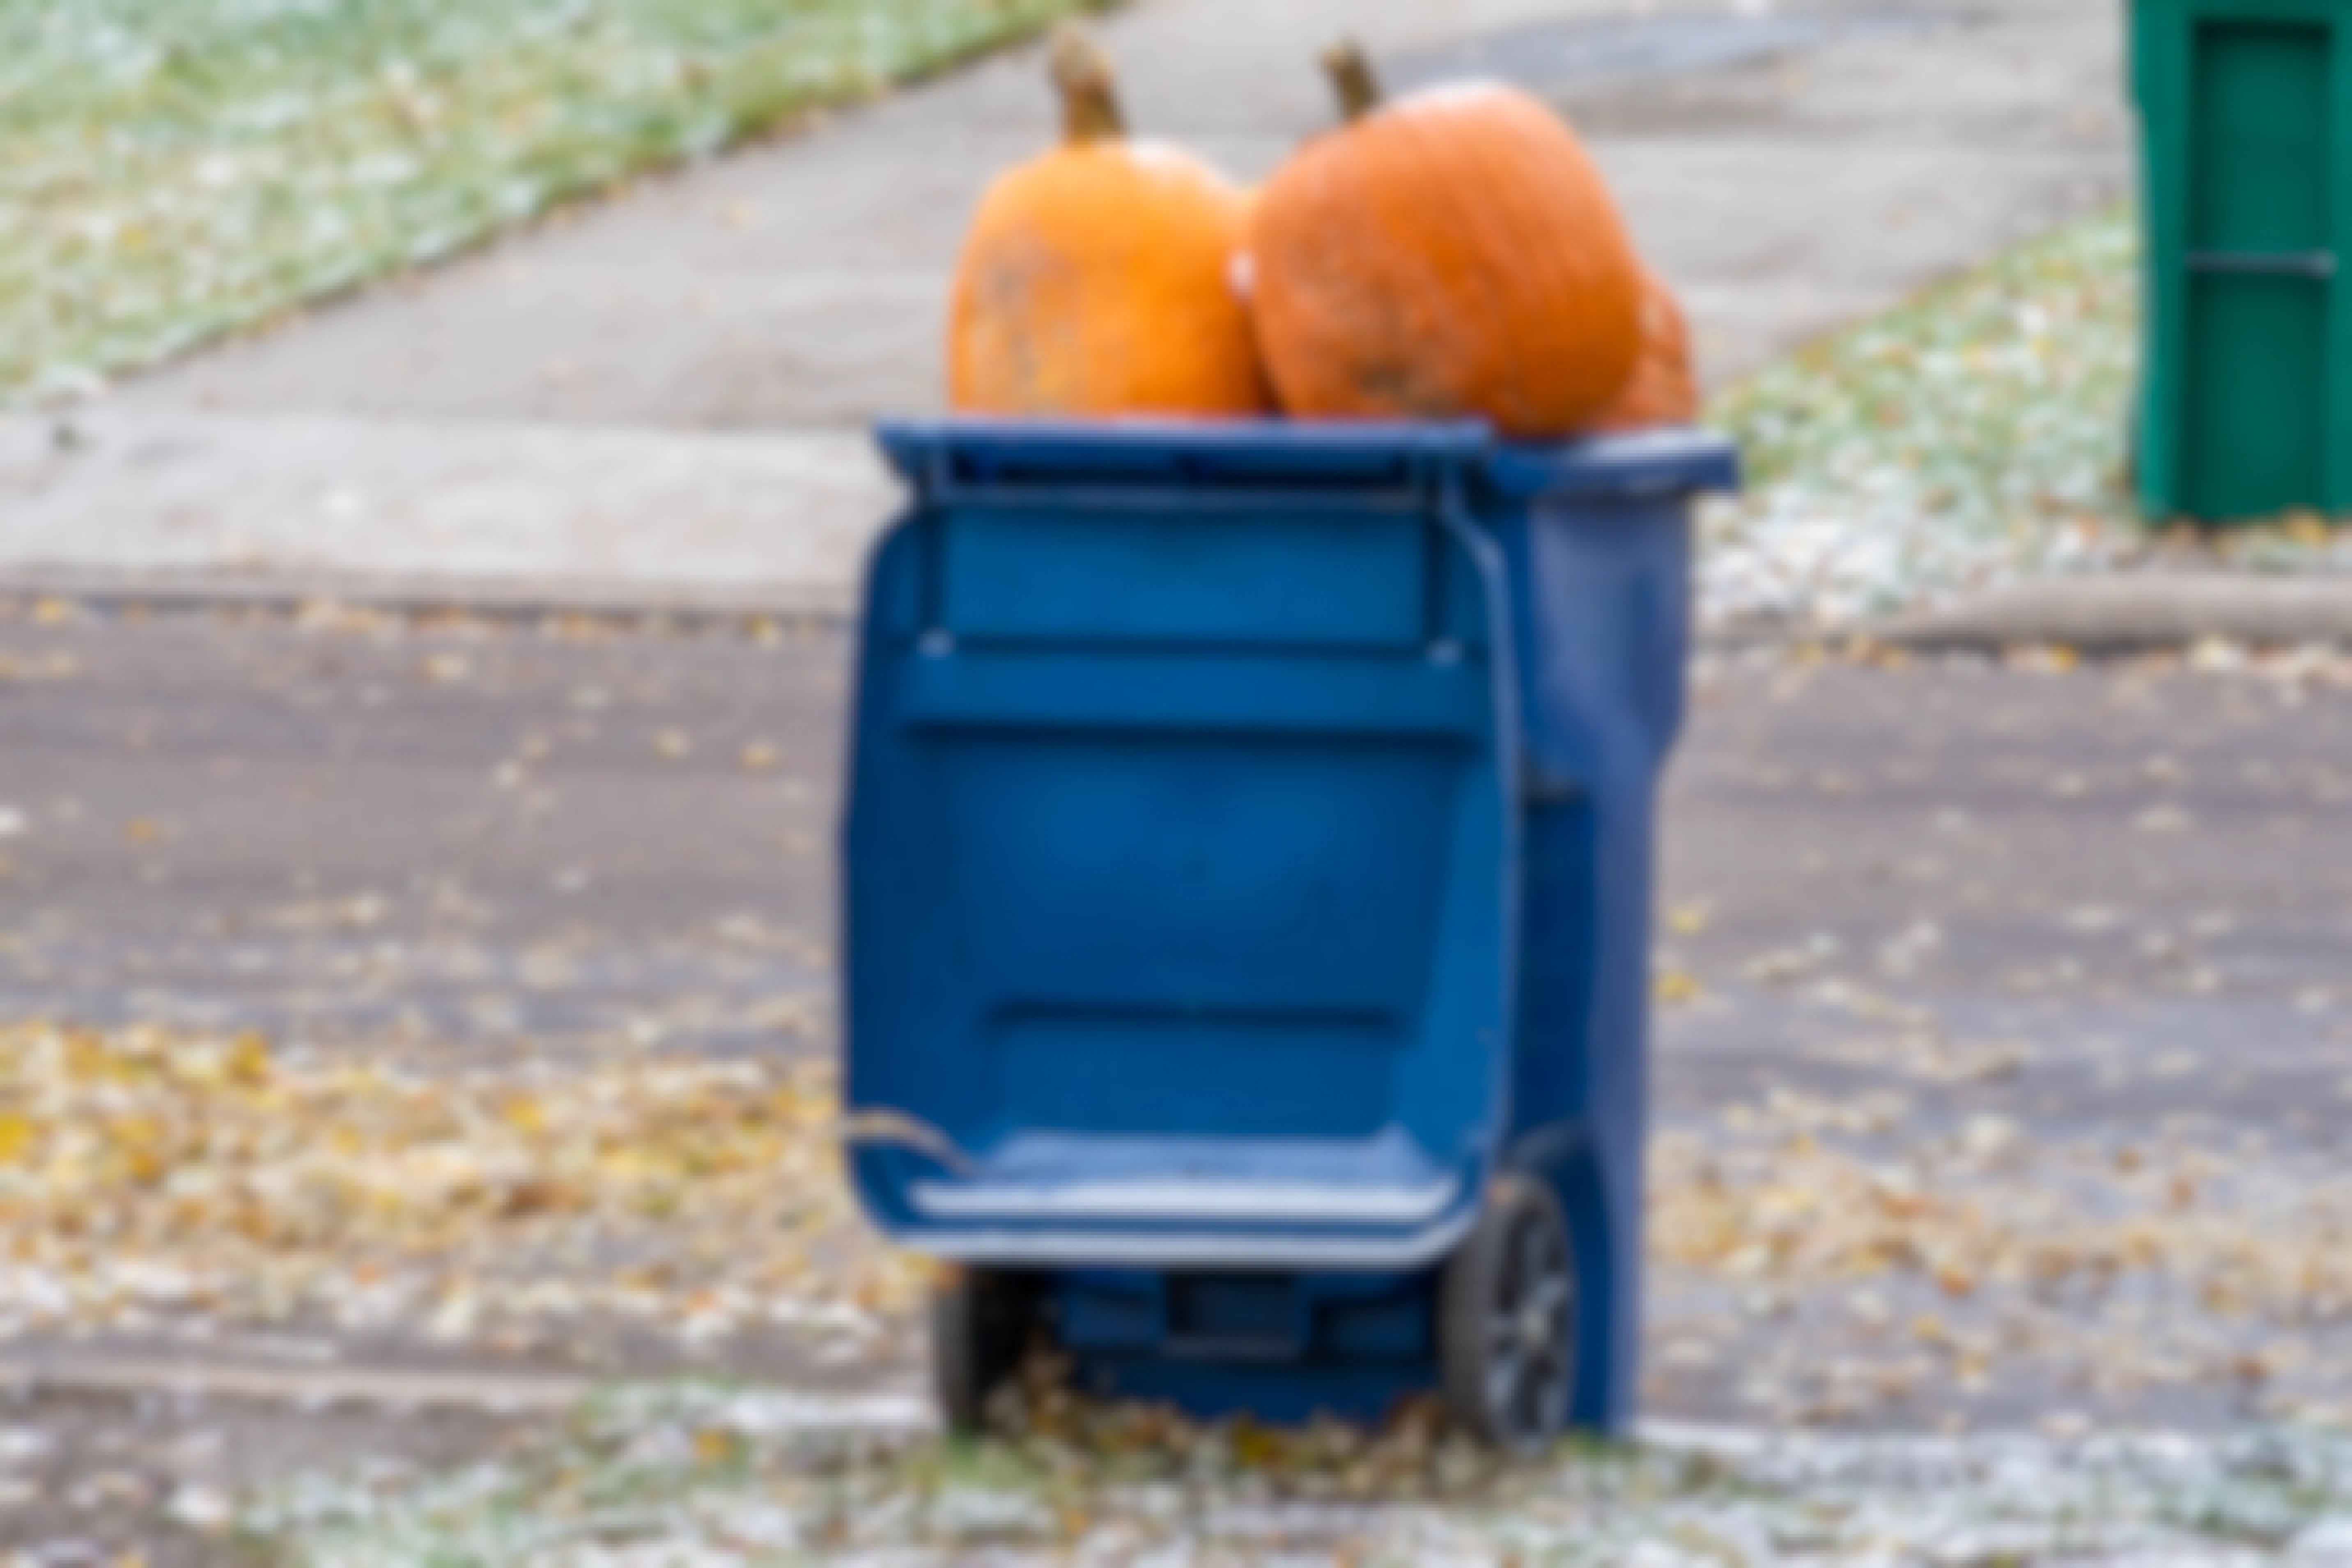 A blue garbage can sitting near the side of a road filled with pumpkins.